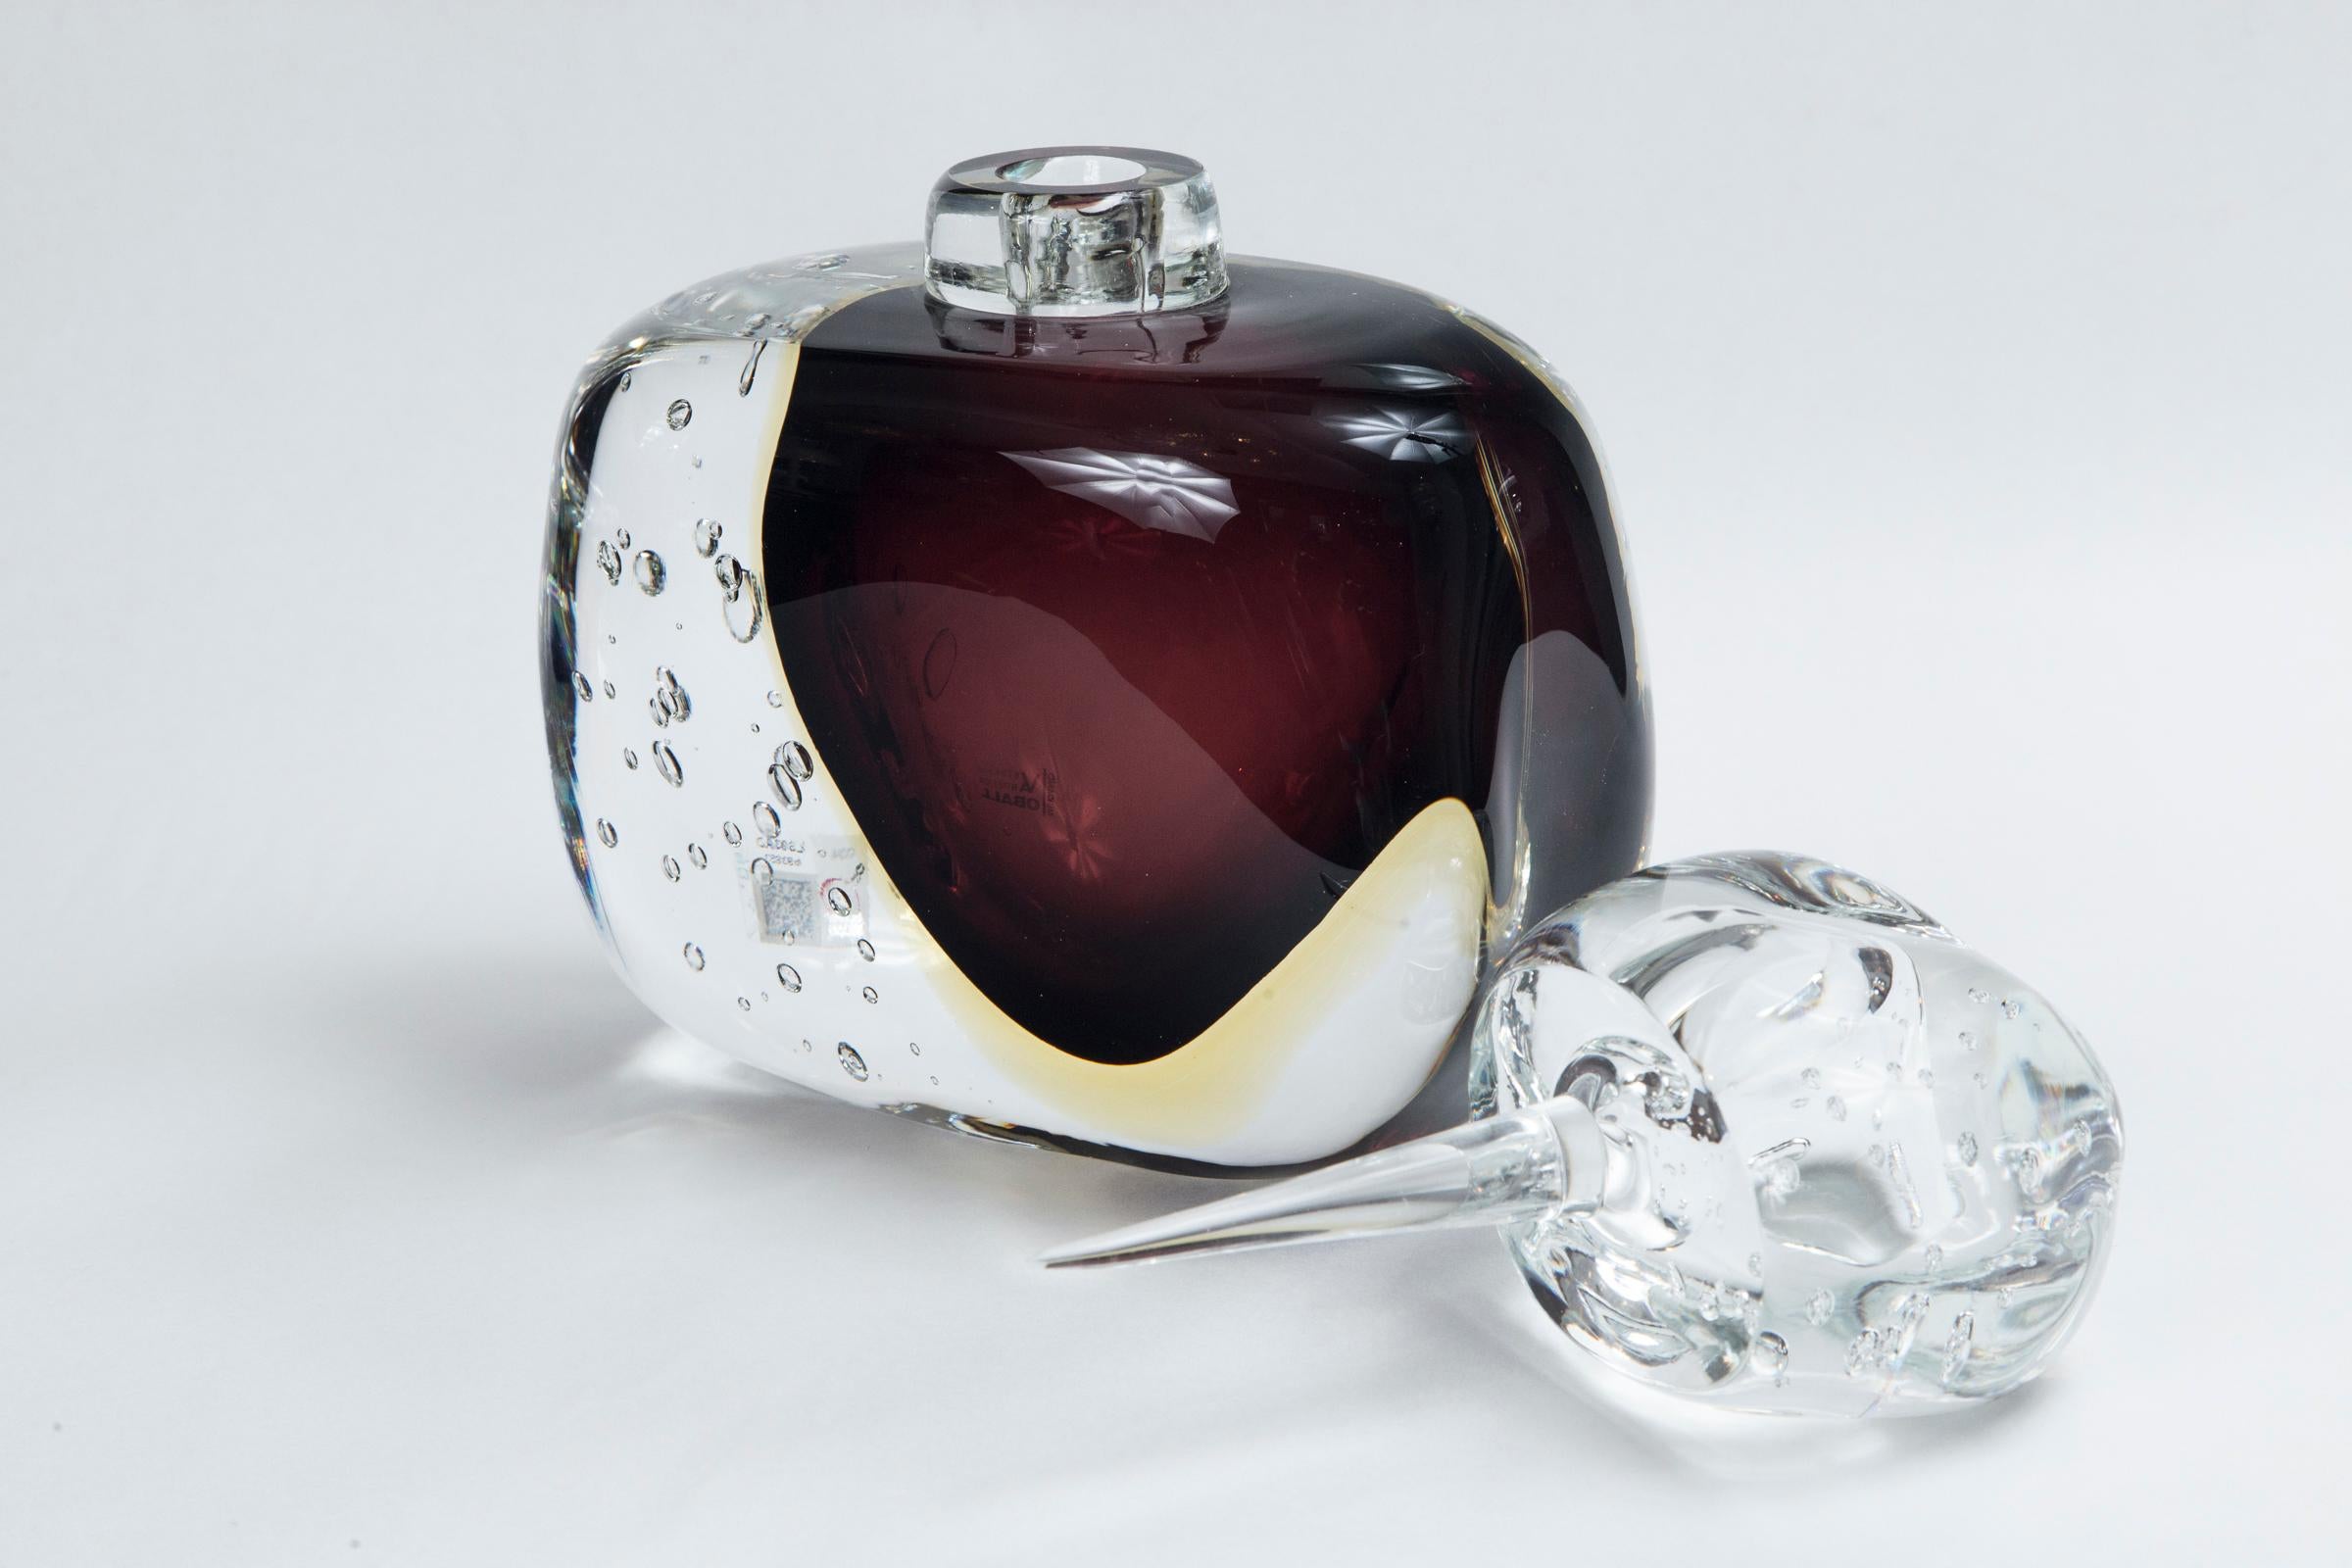 perfume with apple shaped bottle